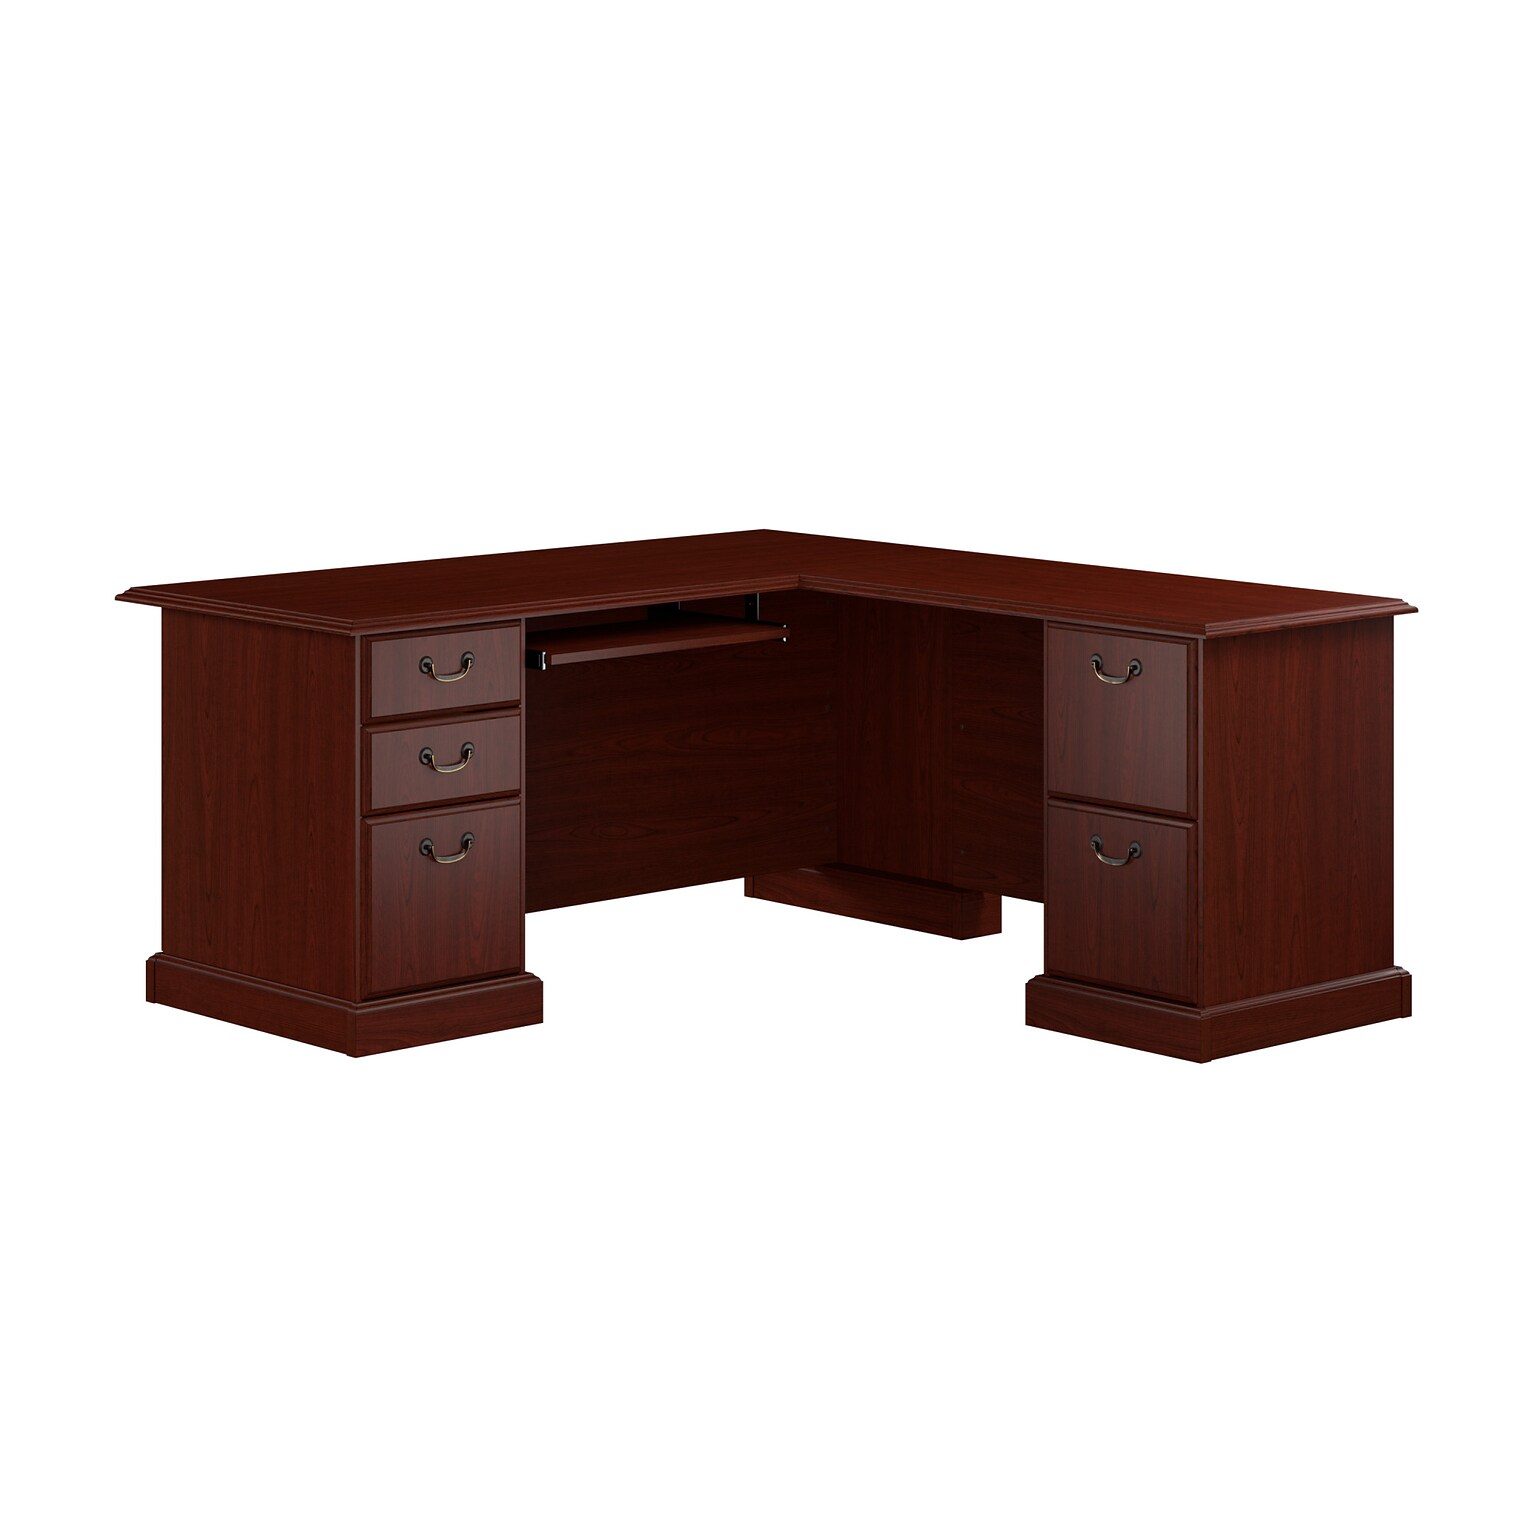 Bush Business Furniture 66W Arlington L Shaped Desk with Drawers and Keyboard Tray, Harvest Cherry (WC65570-03K)